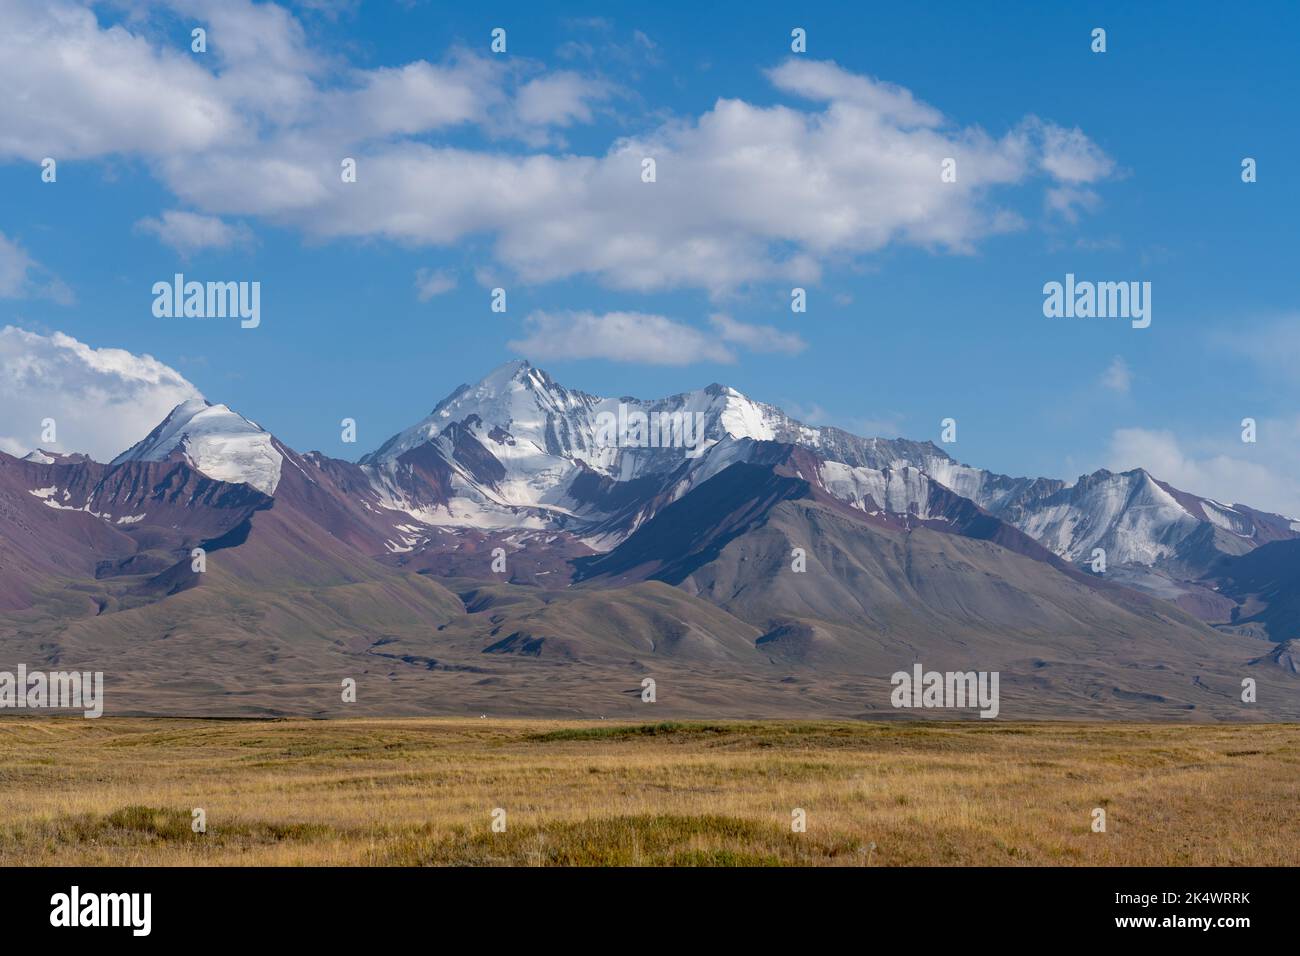 View of snow-capped Trans-Alai or Trans-Alay mountain range in Sary Tash valley, Kyrgyzstan with pasture foreground along the Pamir Highway Stock Photo